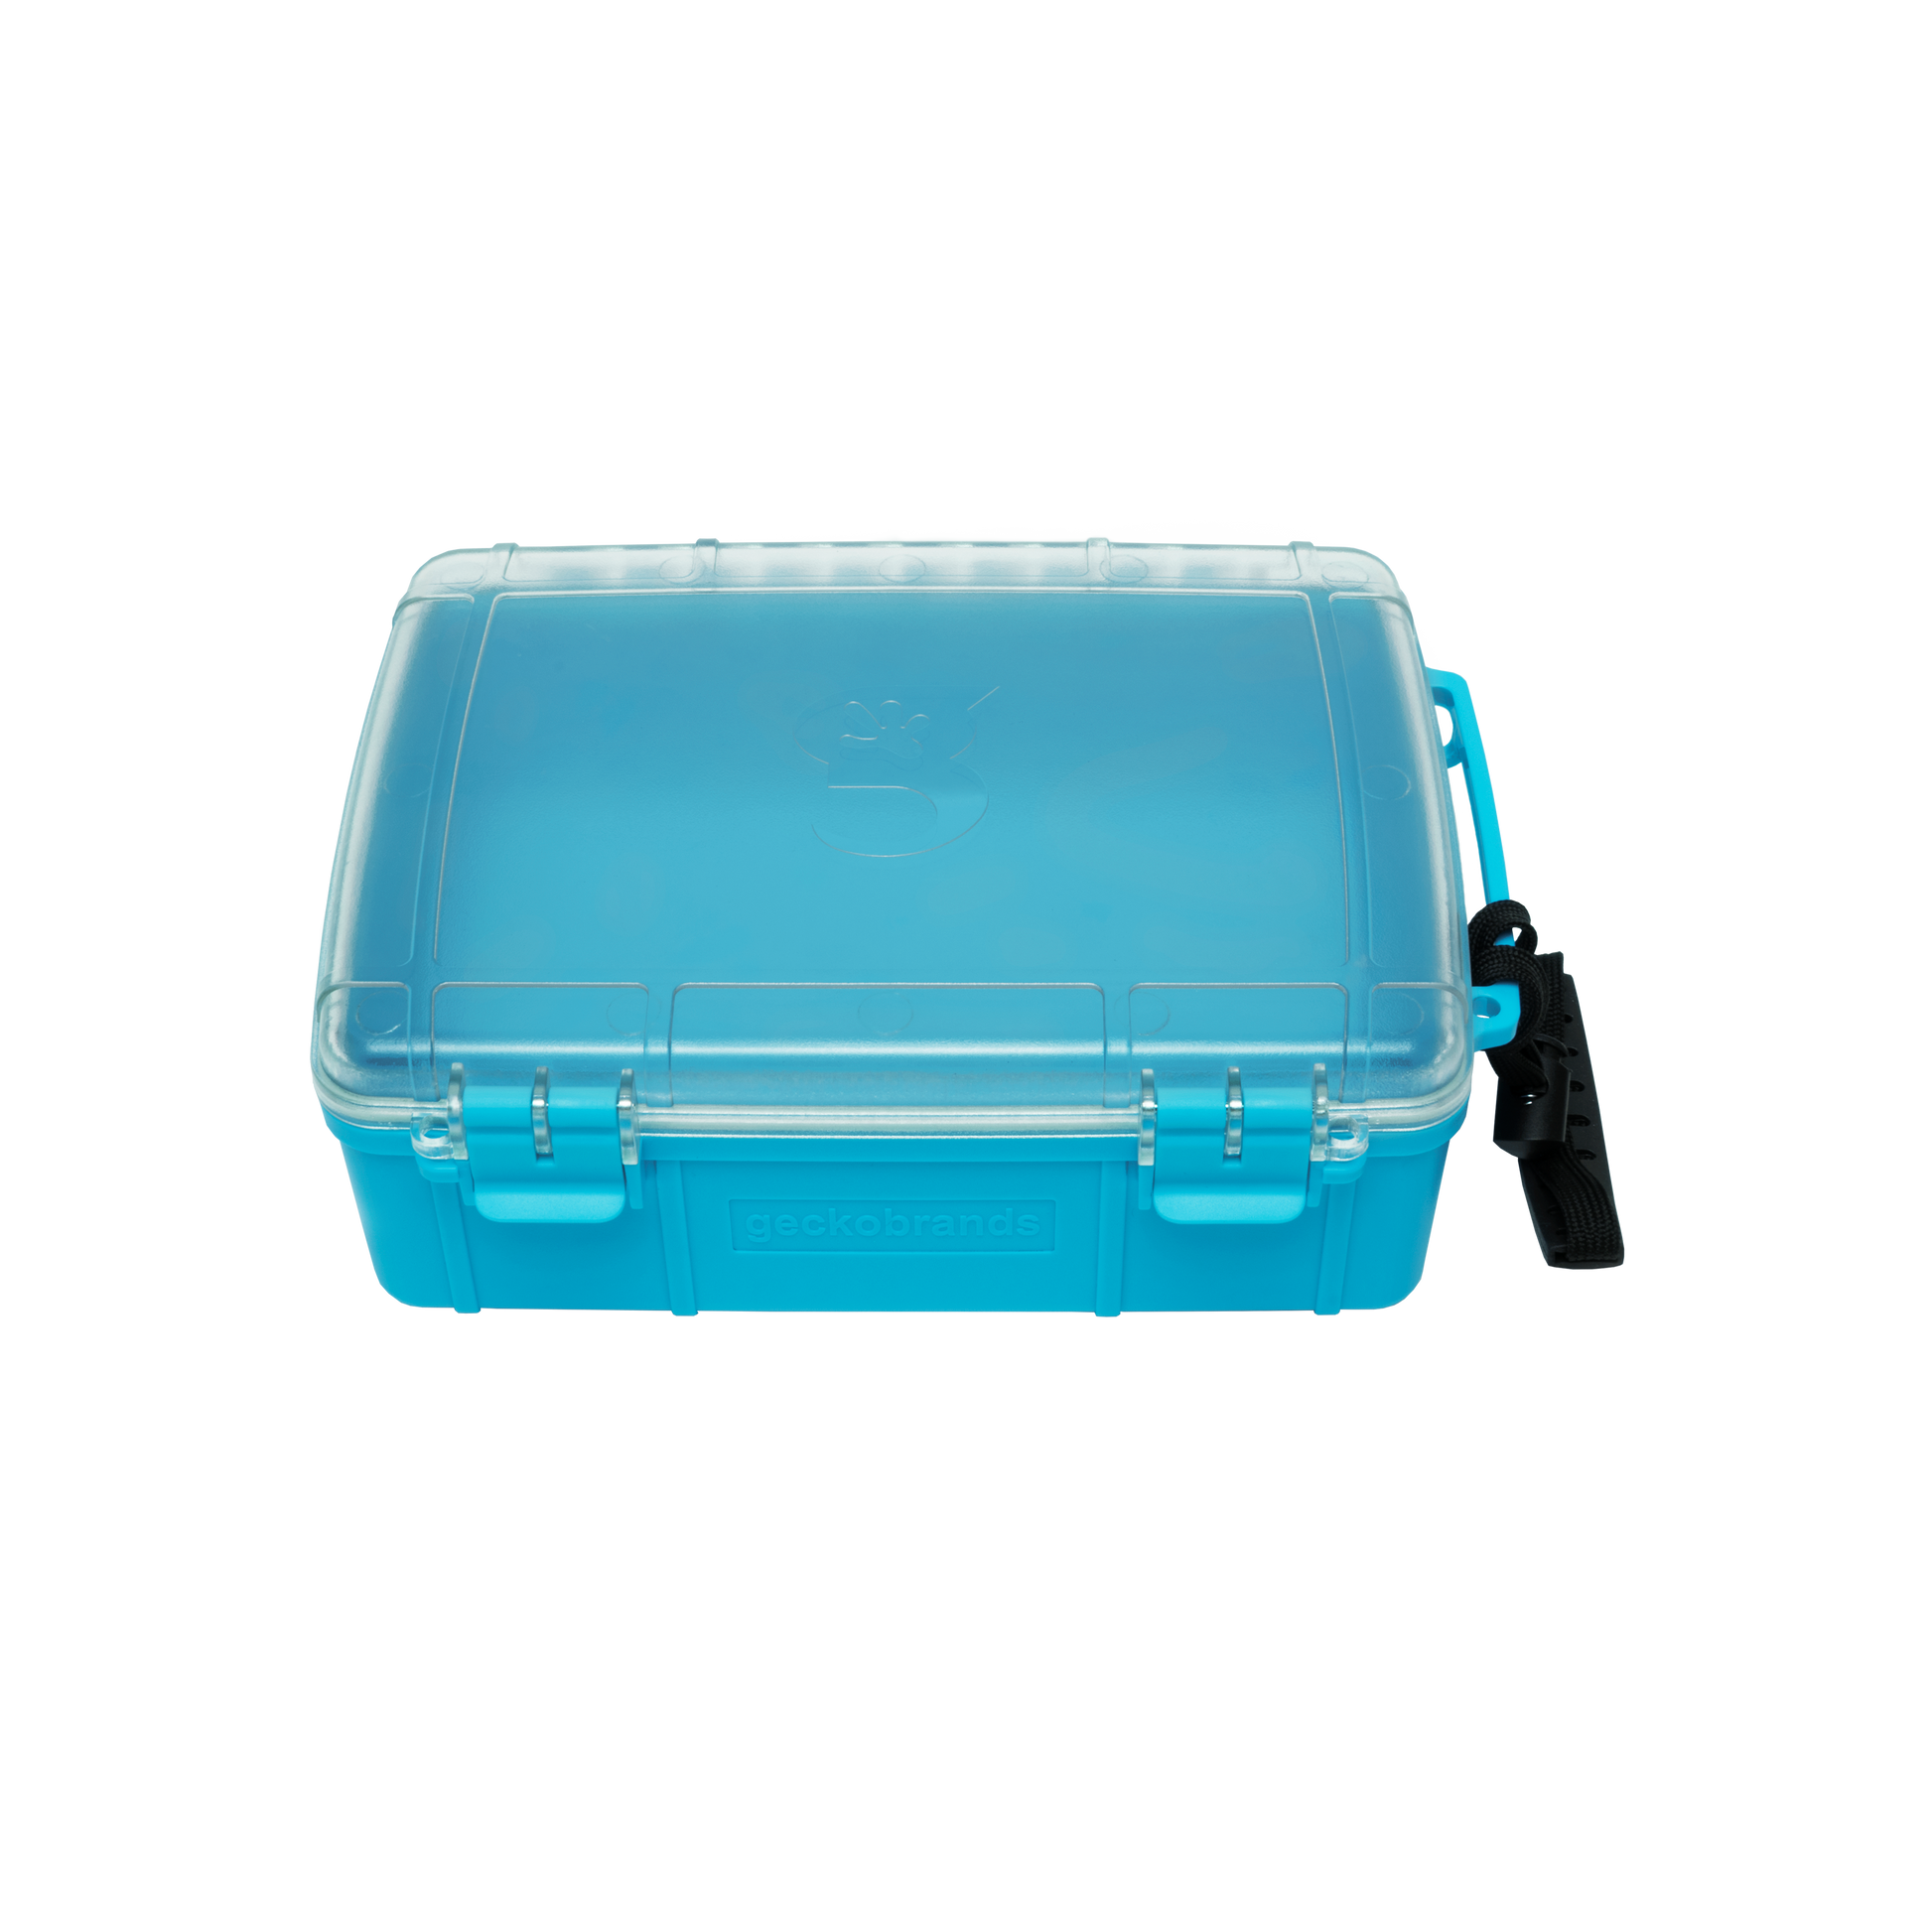 Avlcoaky Dry Box Waterpoof Dry Box Small Dry Box Waterproof for Boat Waterproof Containers Kayak Dry Storage Box